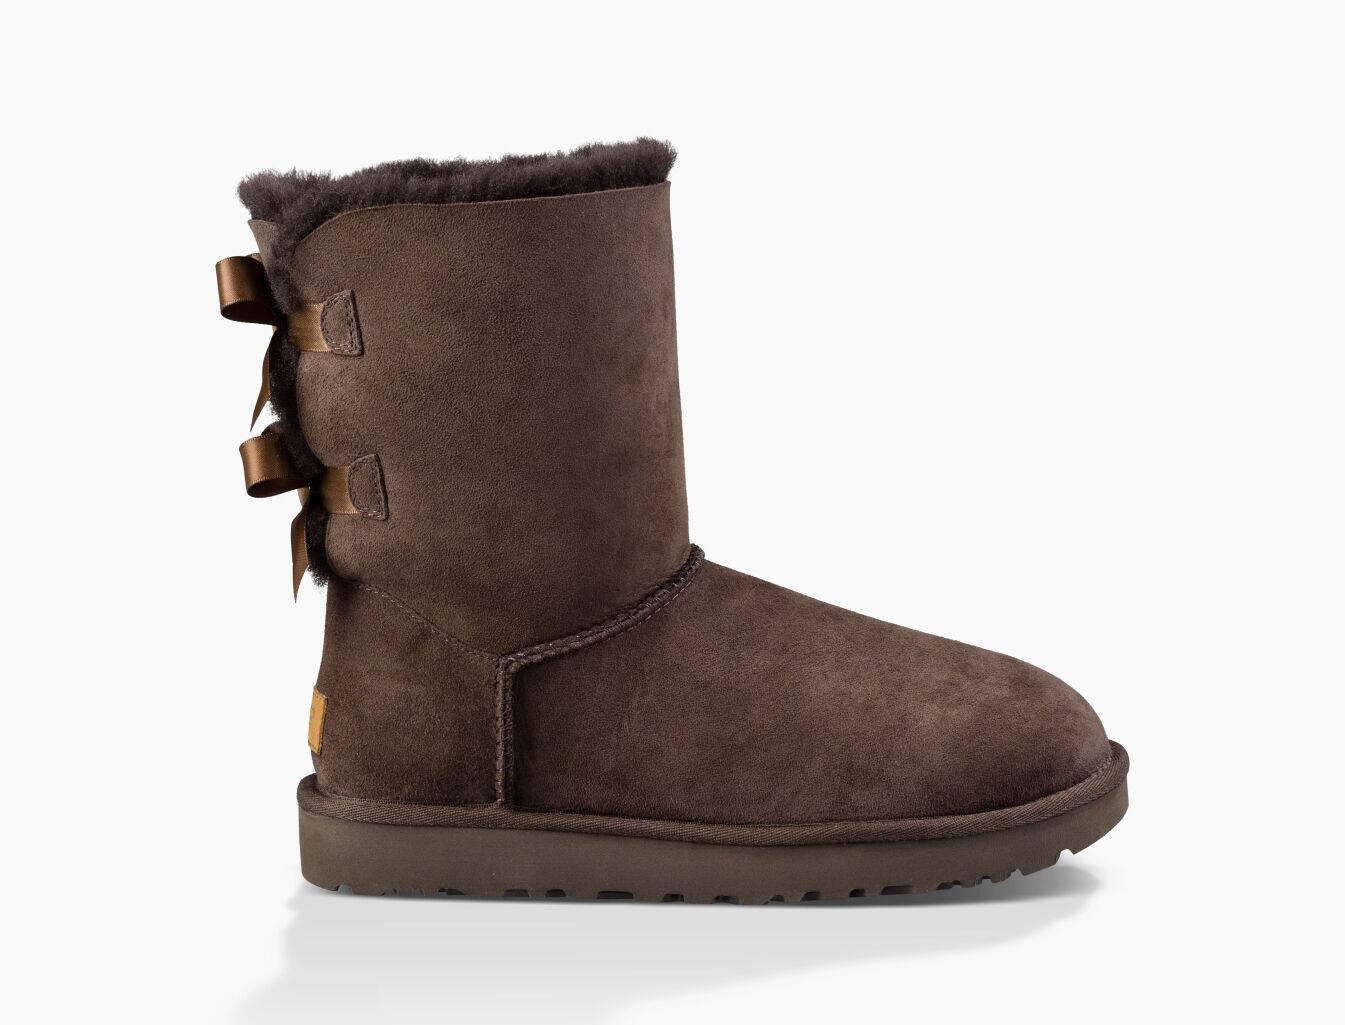 chocolate brown uggs with bows